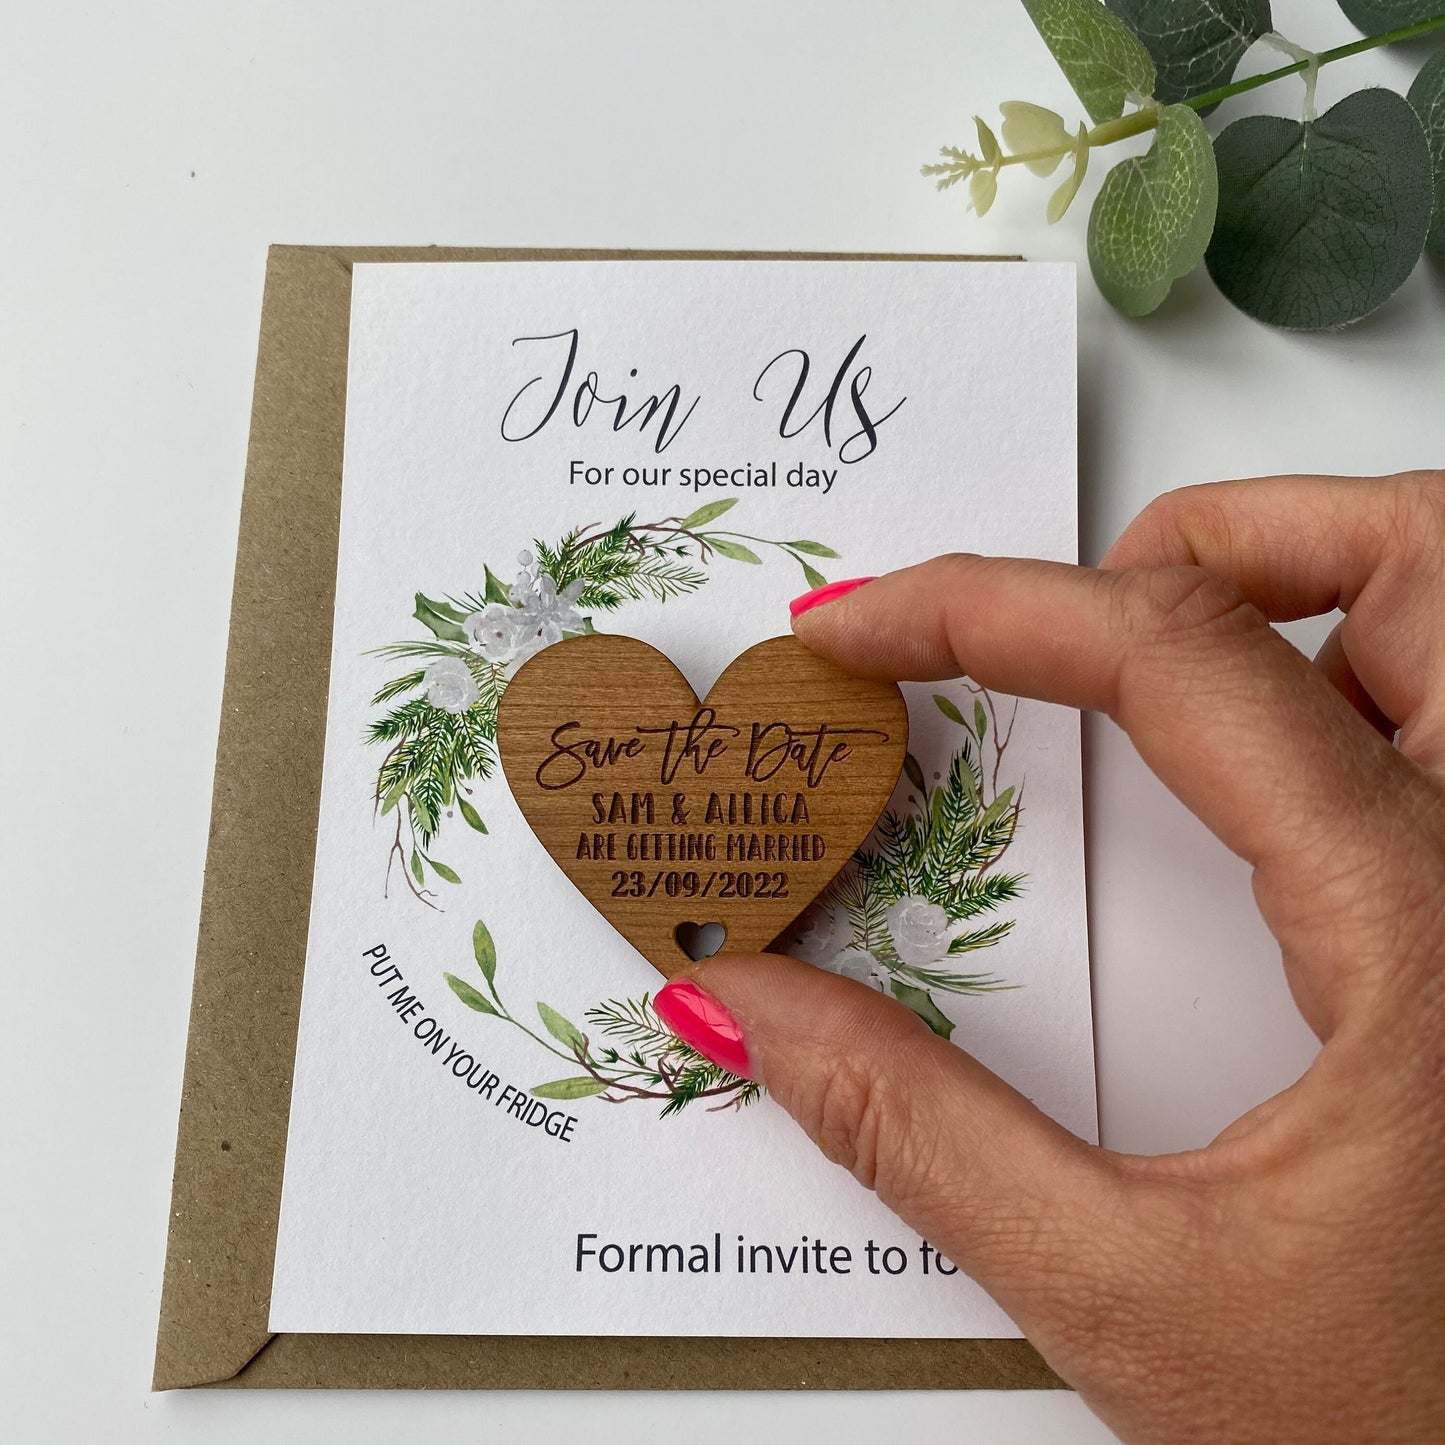 Save the Date Wedding Announcement Invites